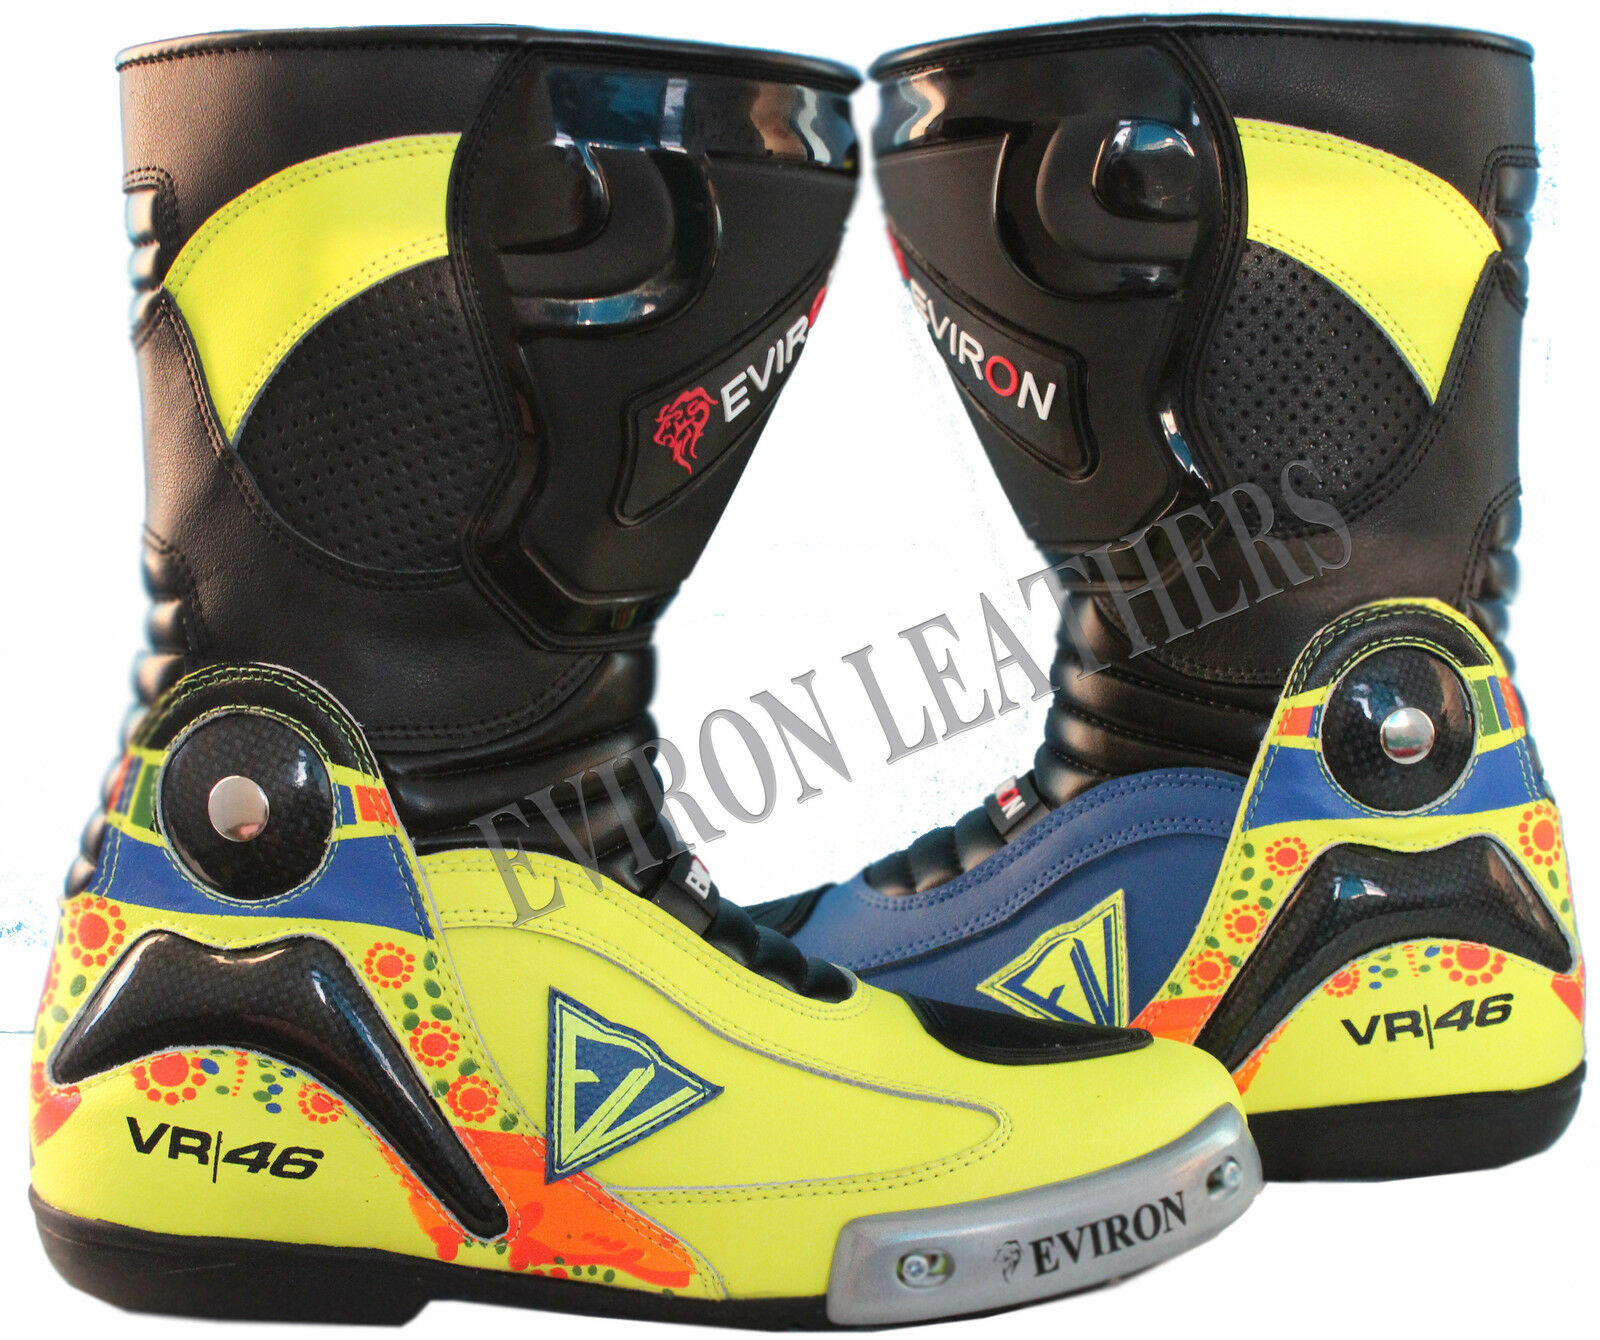 superbike boots for sale